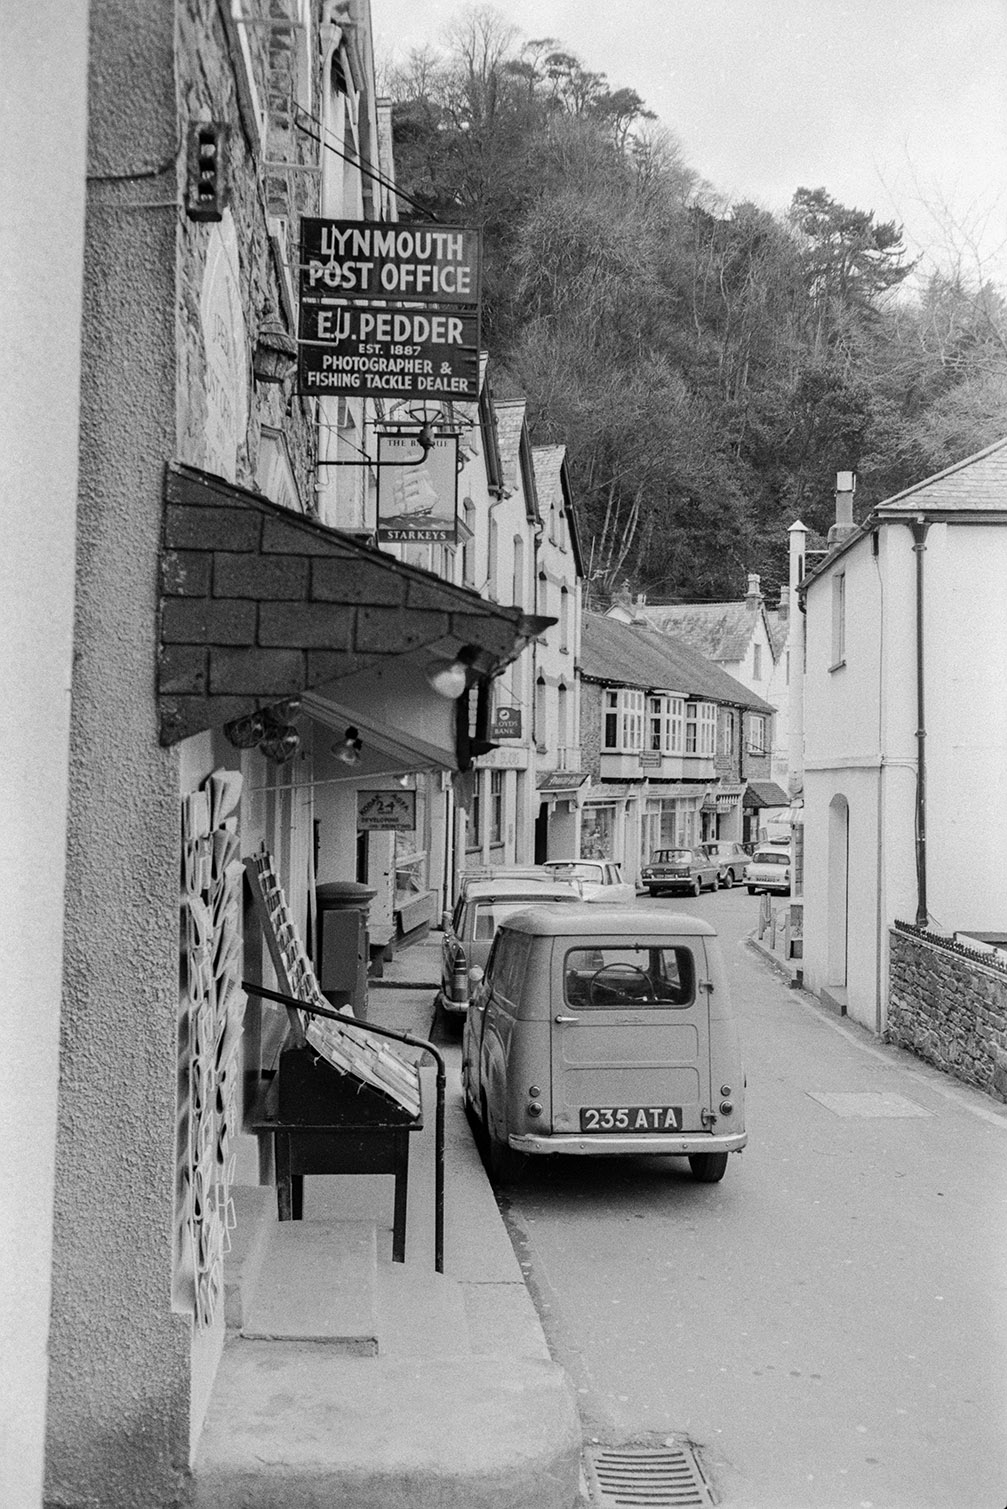 View of a street with parked cars and Lynmouth Post Office. A sign on the post office building reads 'E J Pedder photographer & Fishing Tackle Dealer'. Newspapers are displayed on racks outside the Post Office.